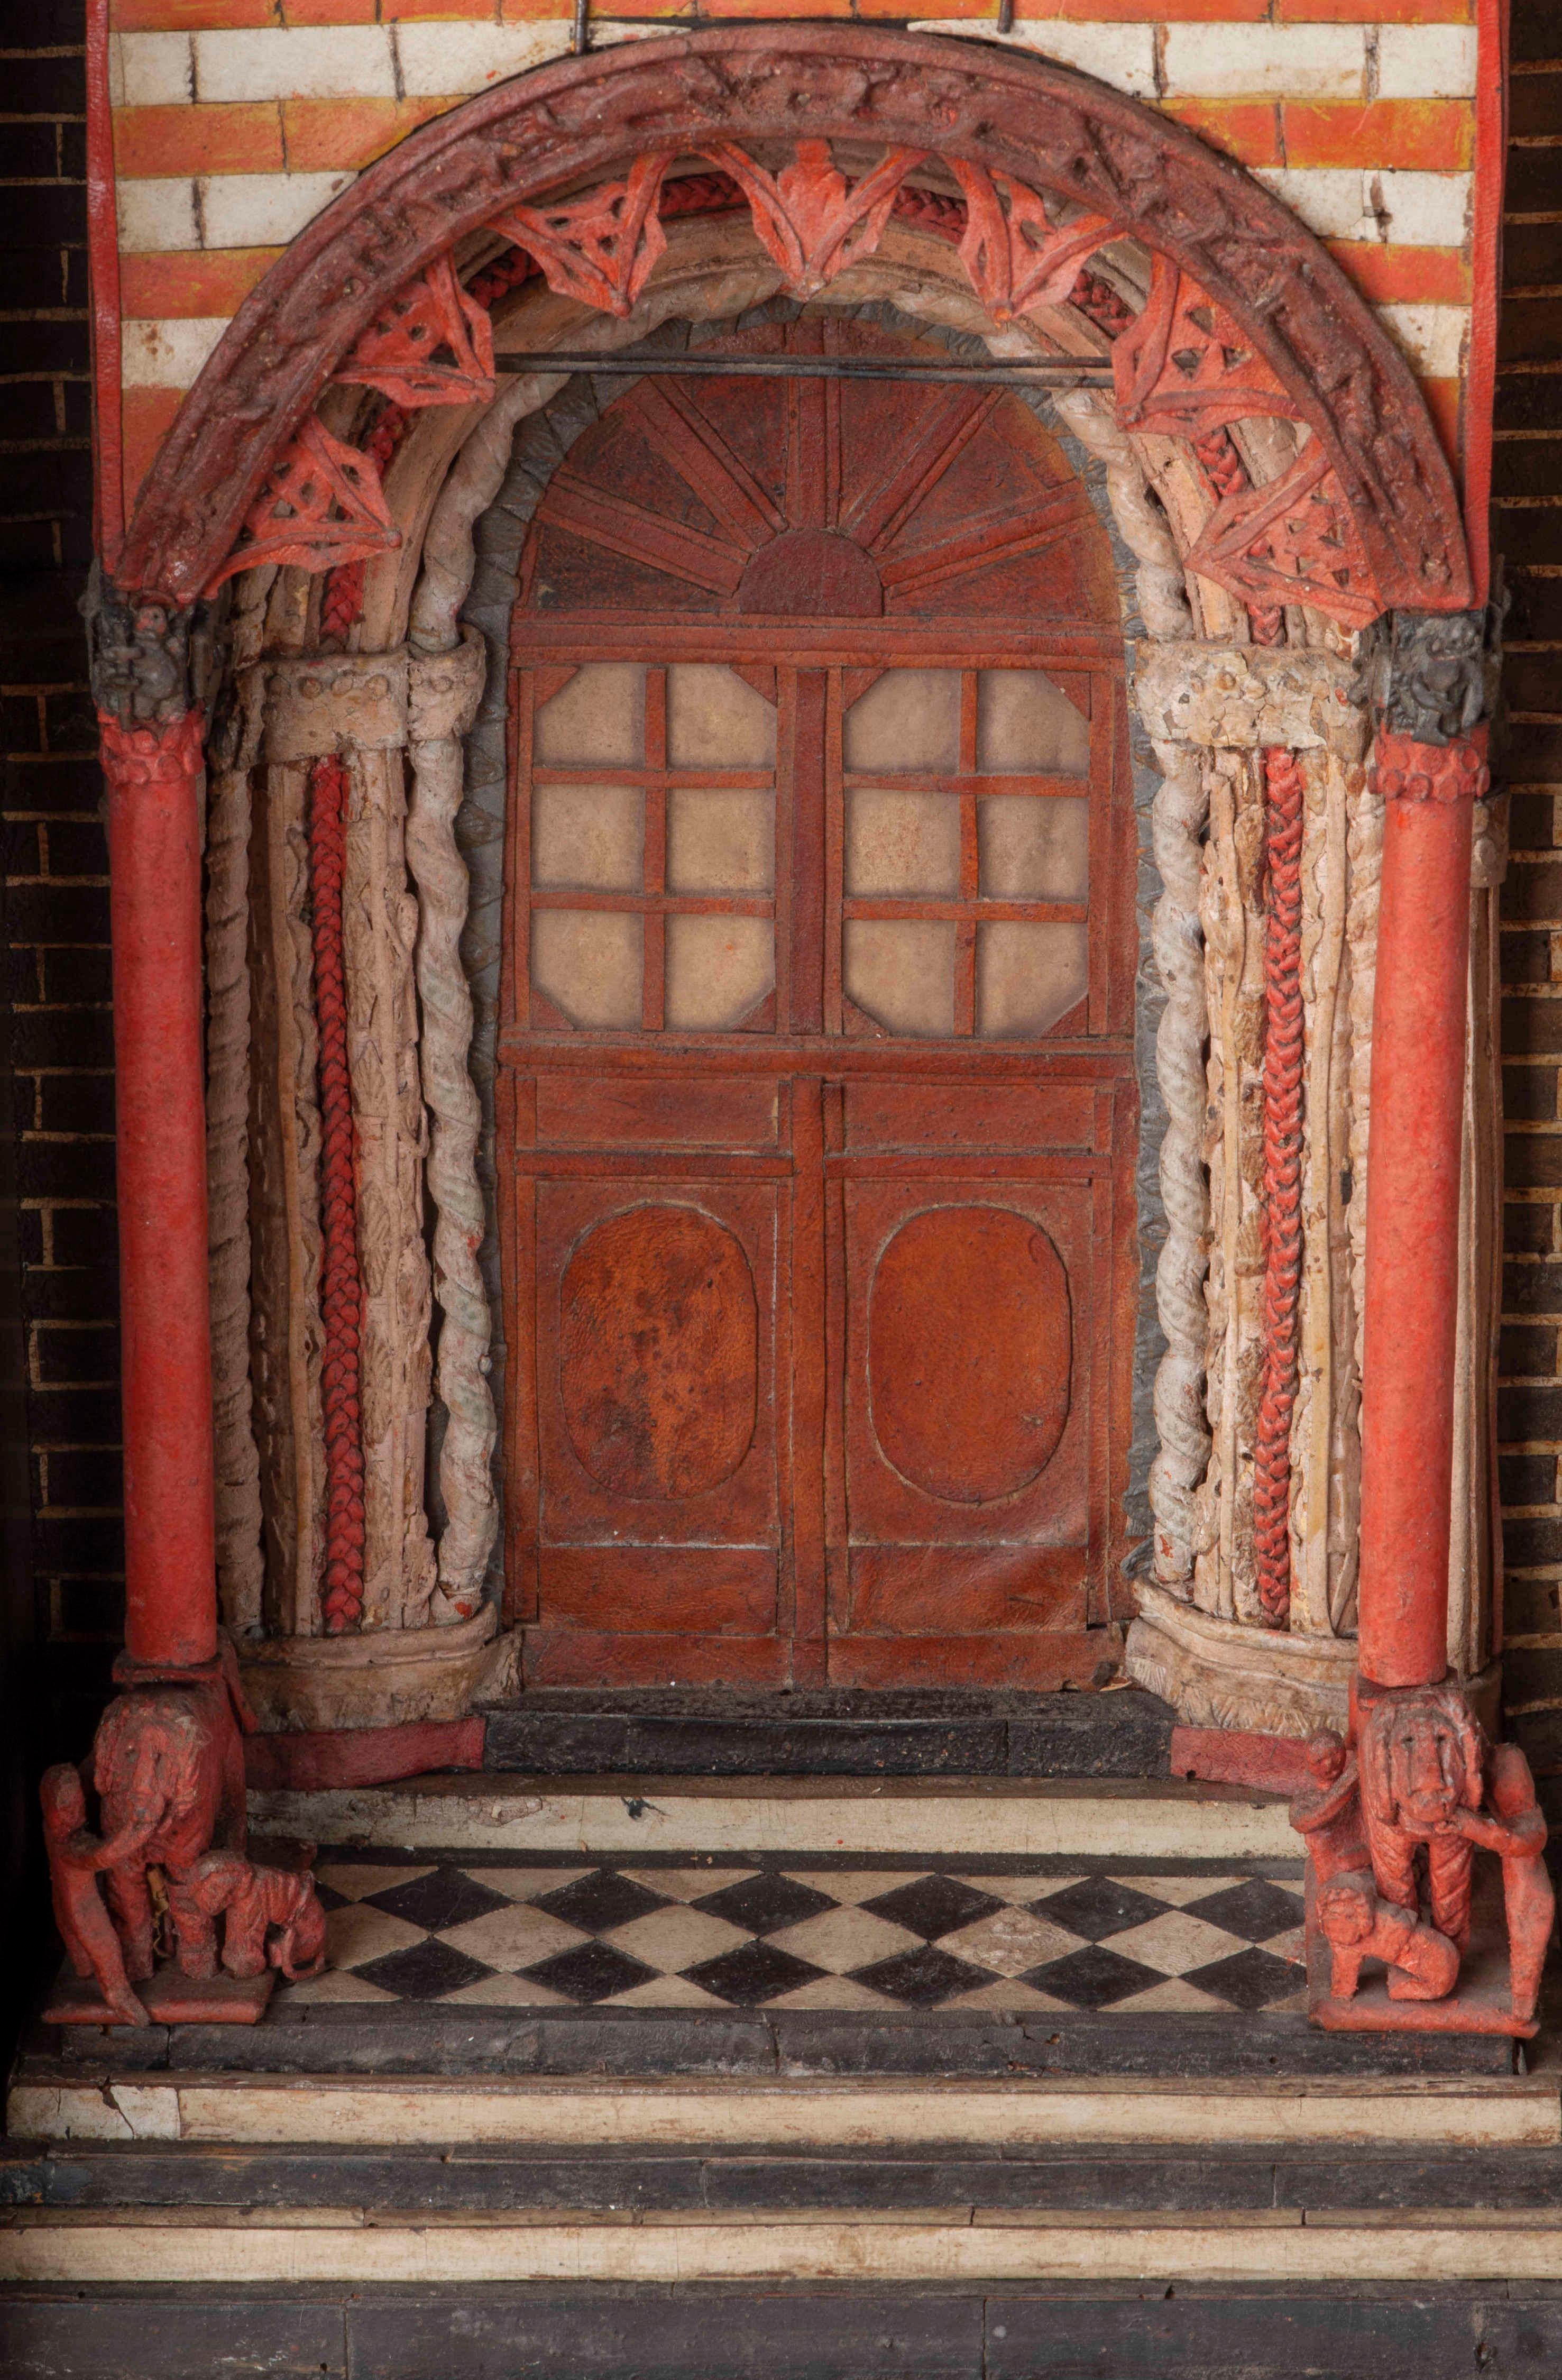 The Colleoni Chapel - Model made of wood, paper, tablet and various materials. For Sale 1